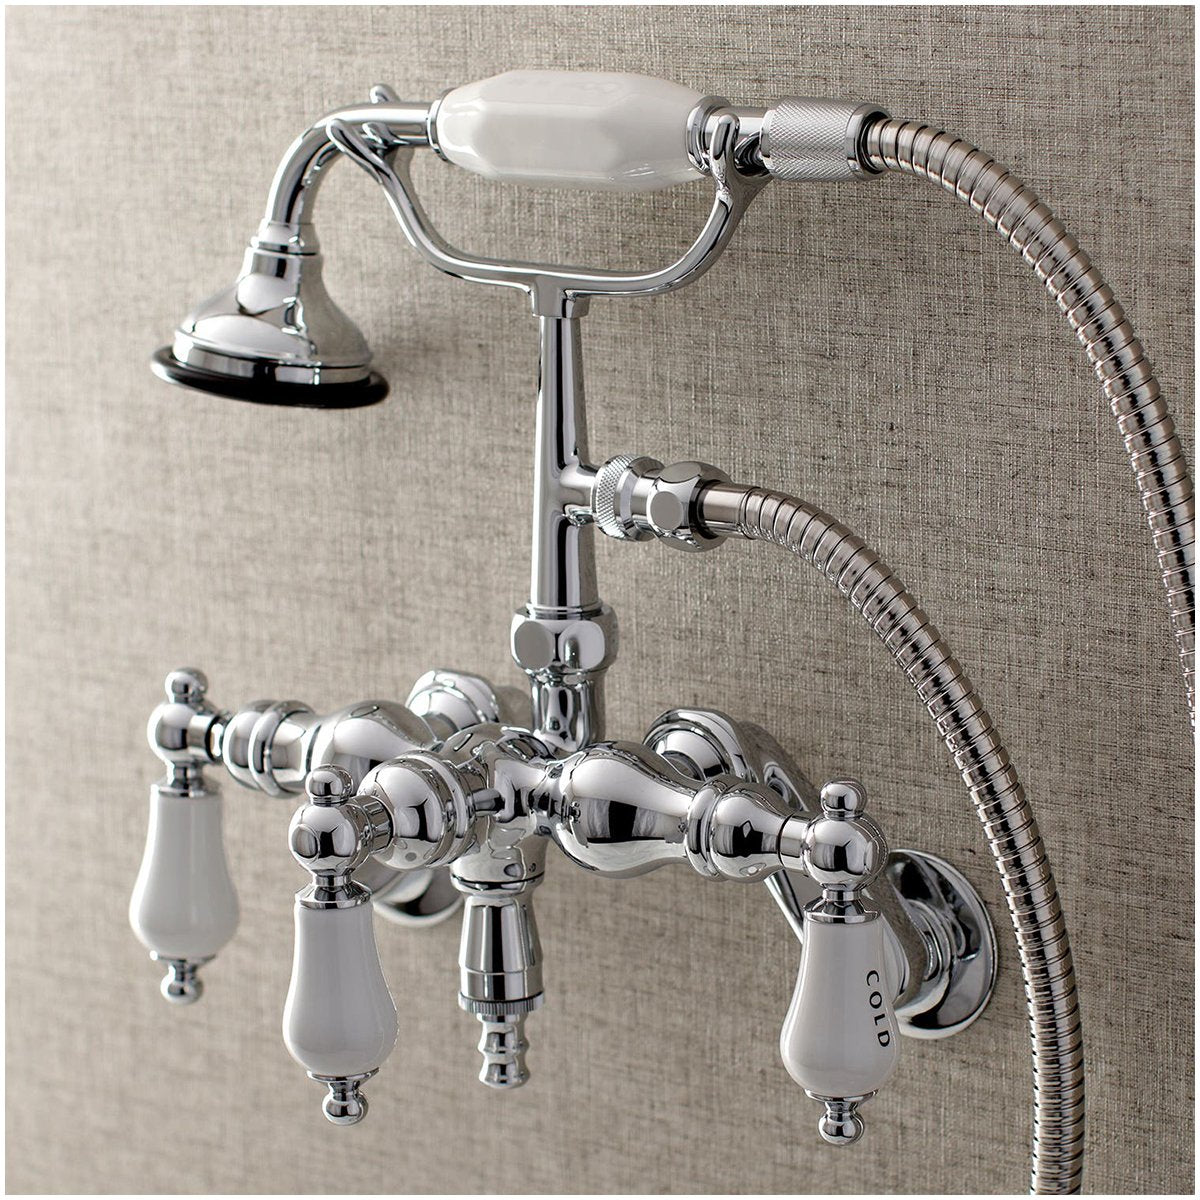 Kingston Brass AE423TX-P Aqua Vintage 3-3/8-Inch Adjustable Wall Mount Clawfoot Tub Faucet with Hand Shower